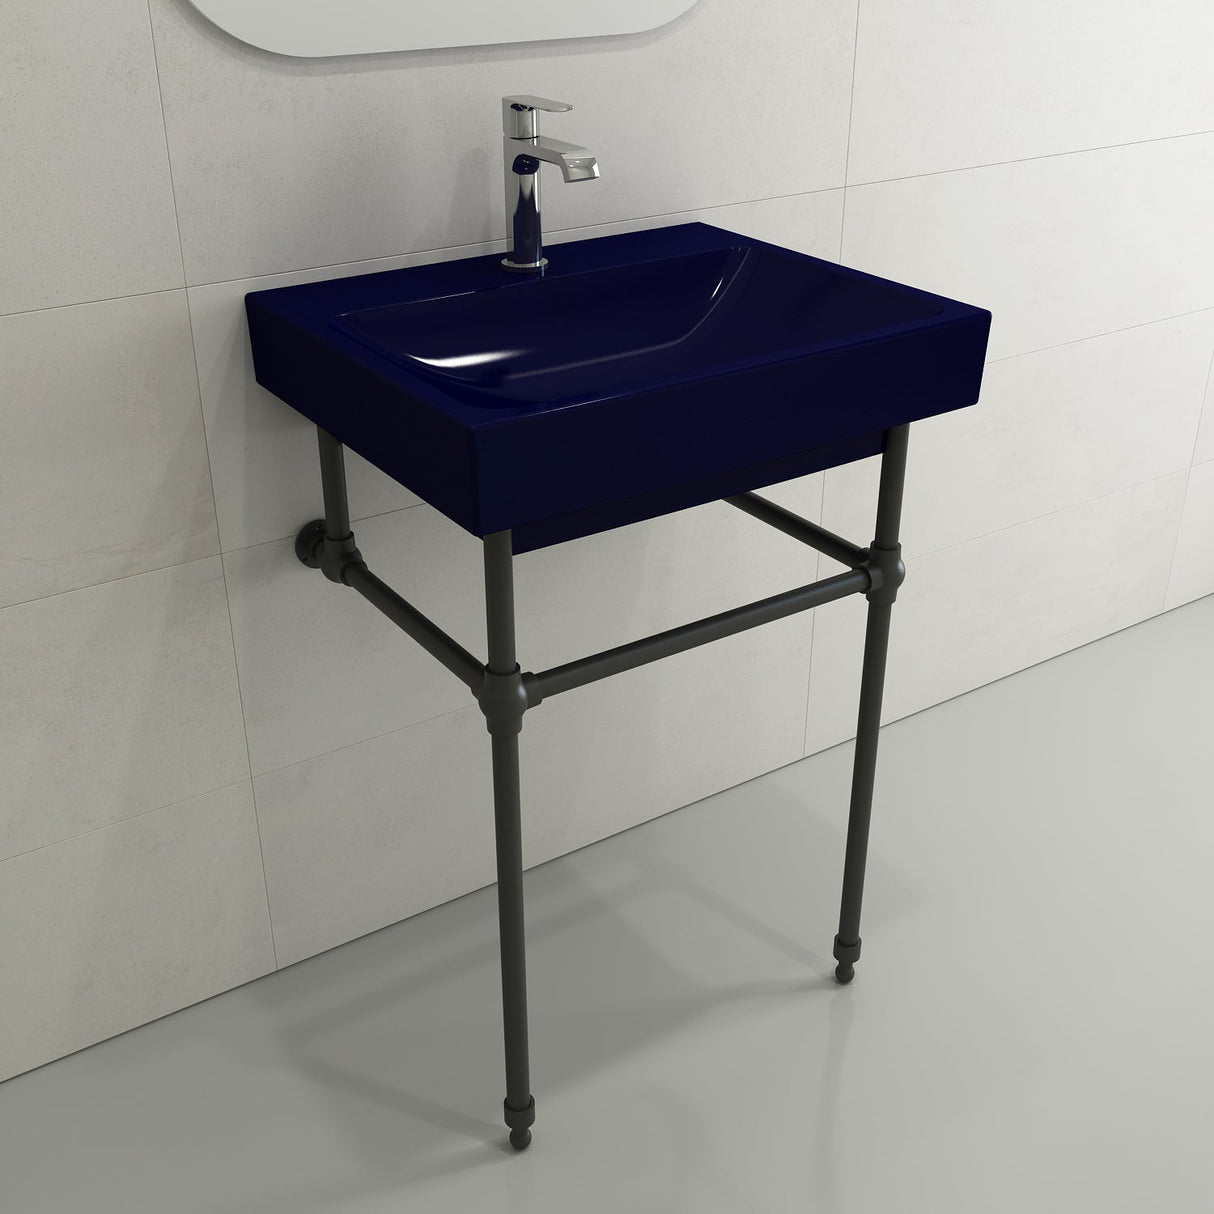 BOCCHI 1077-010-0126 Scala Arch Wall-Mounted Sink Fireclay 23.75 in. 1-Hole in Sapphire Blue